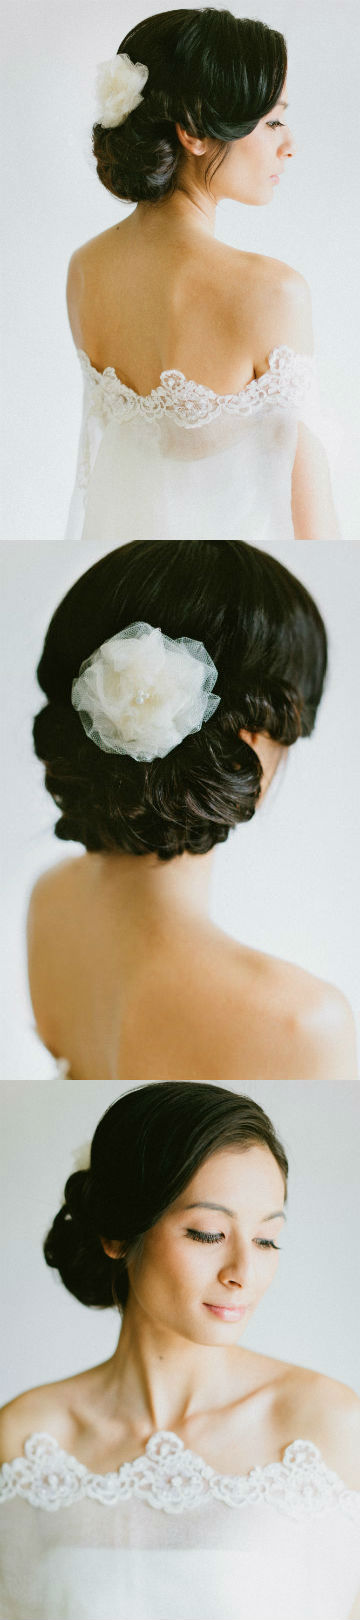 If you are going with this look for your wedding aim for natural looking 